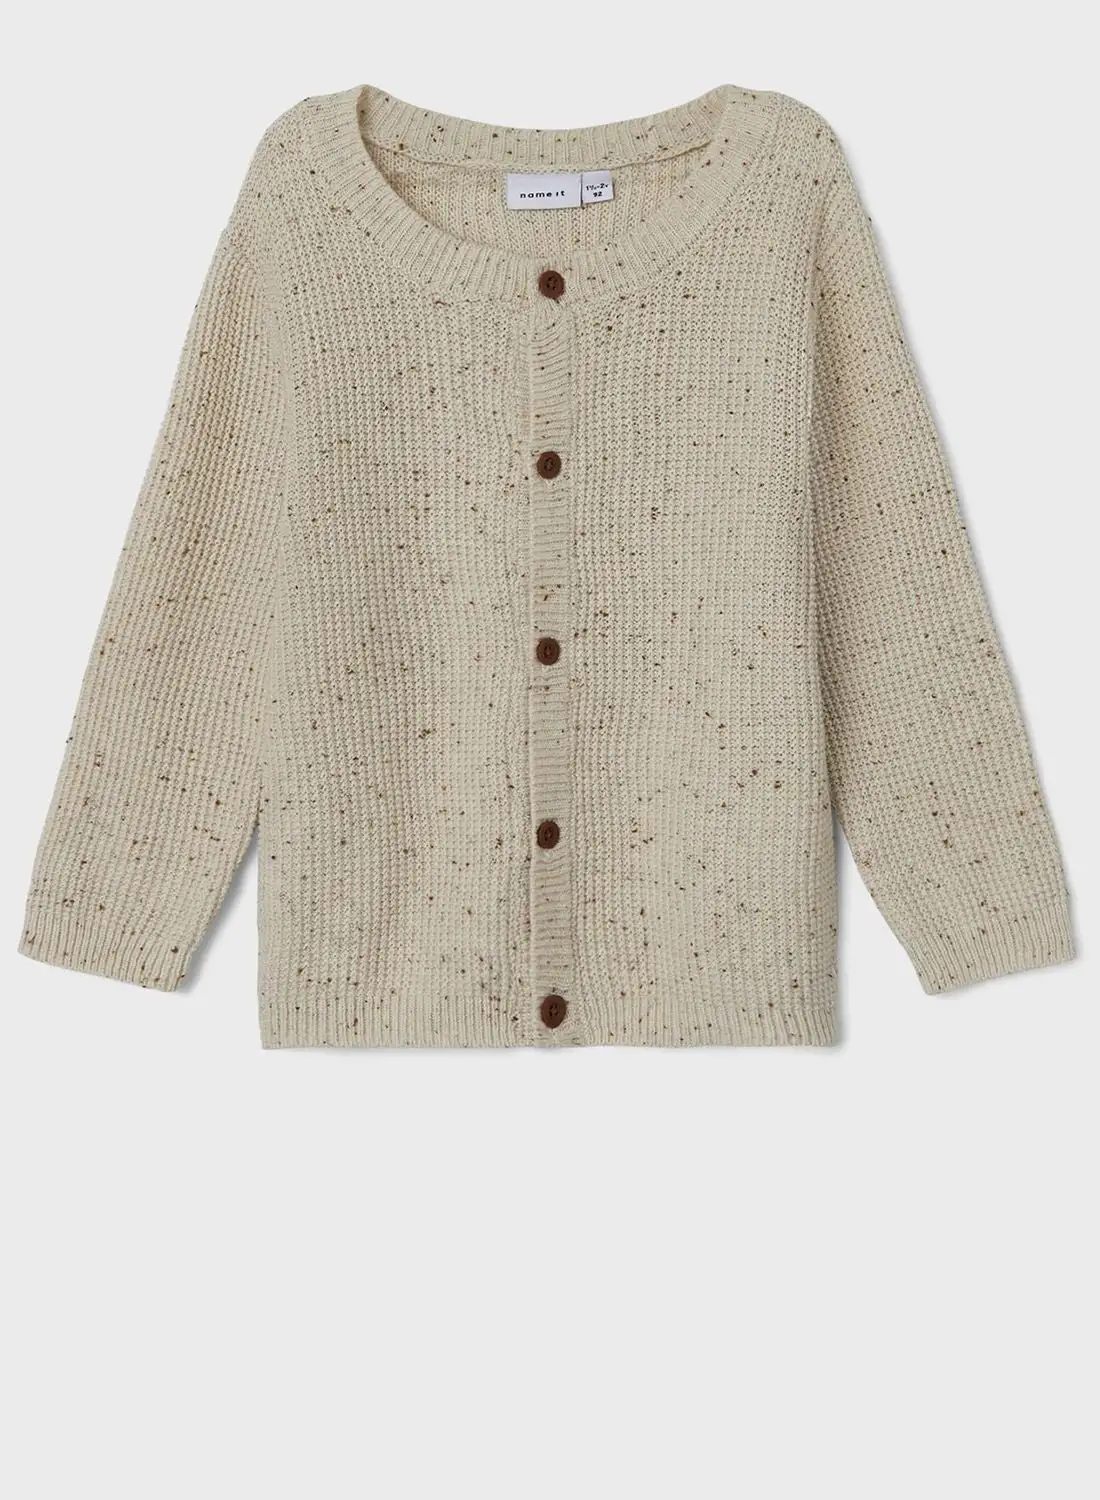 NAME IT Kids Knitted Cardigan